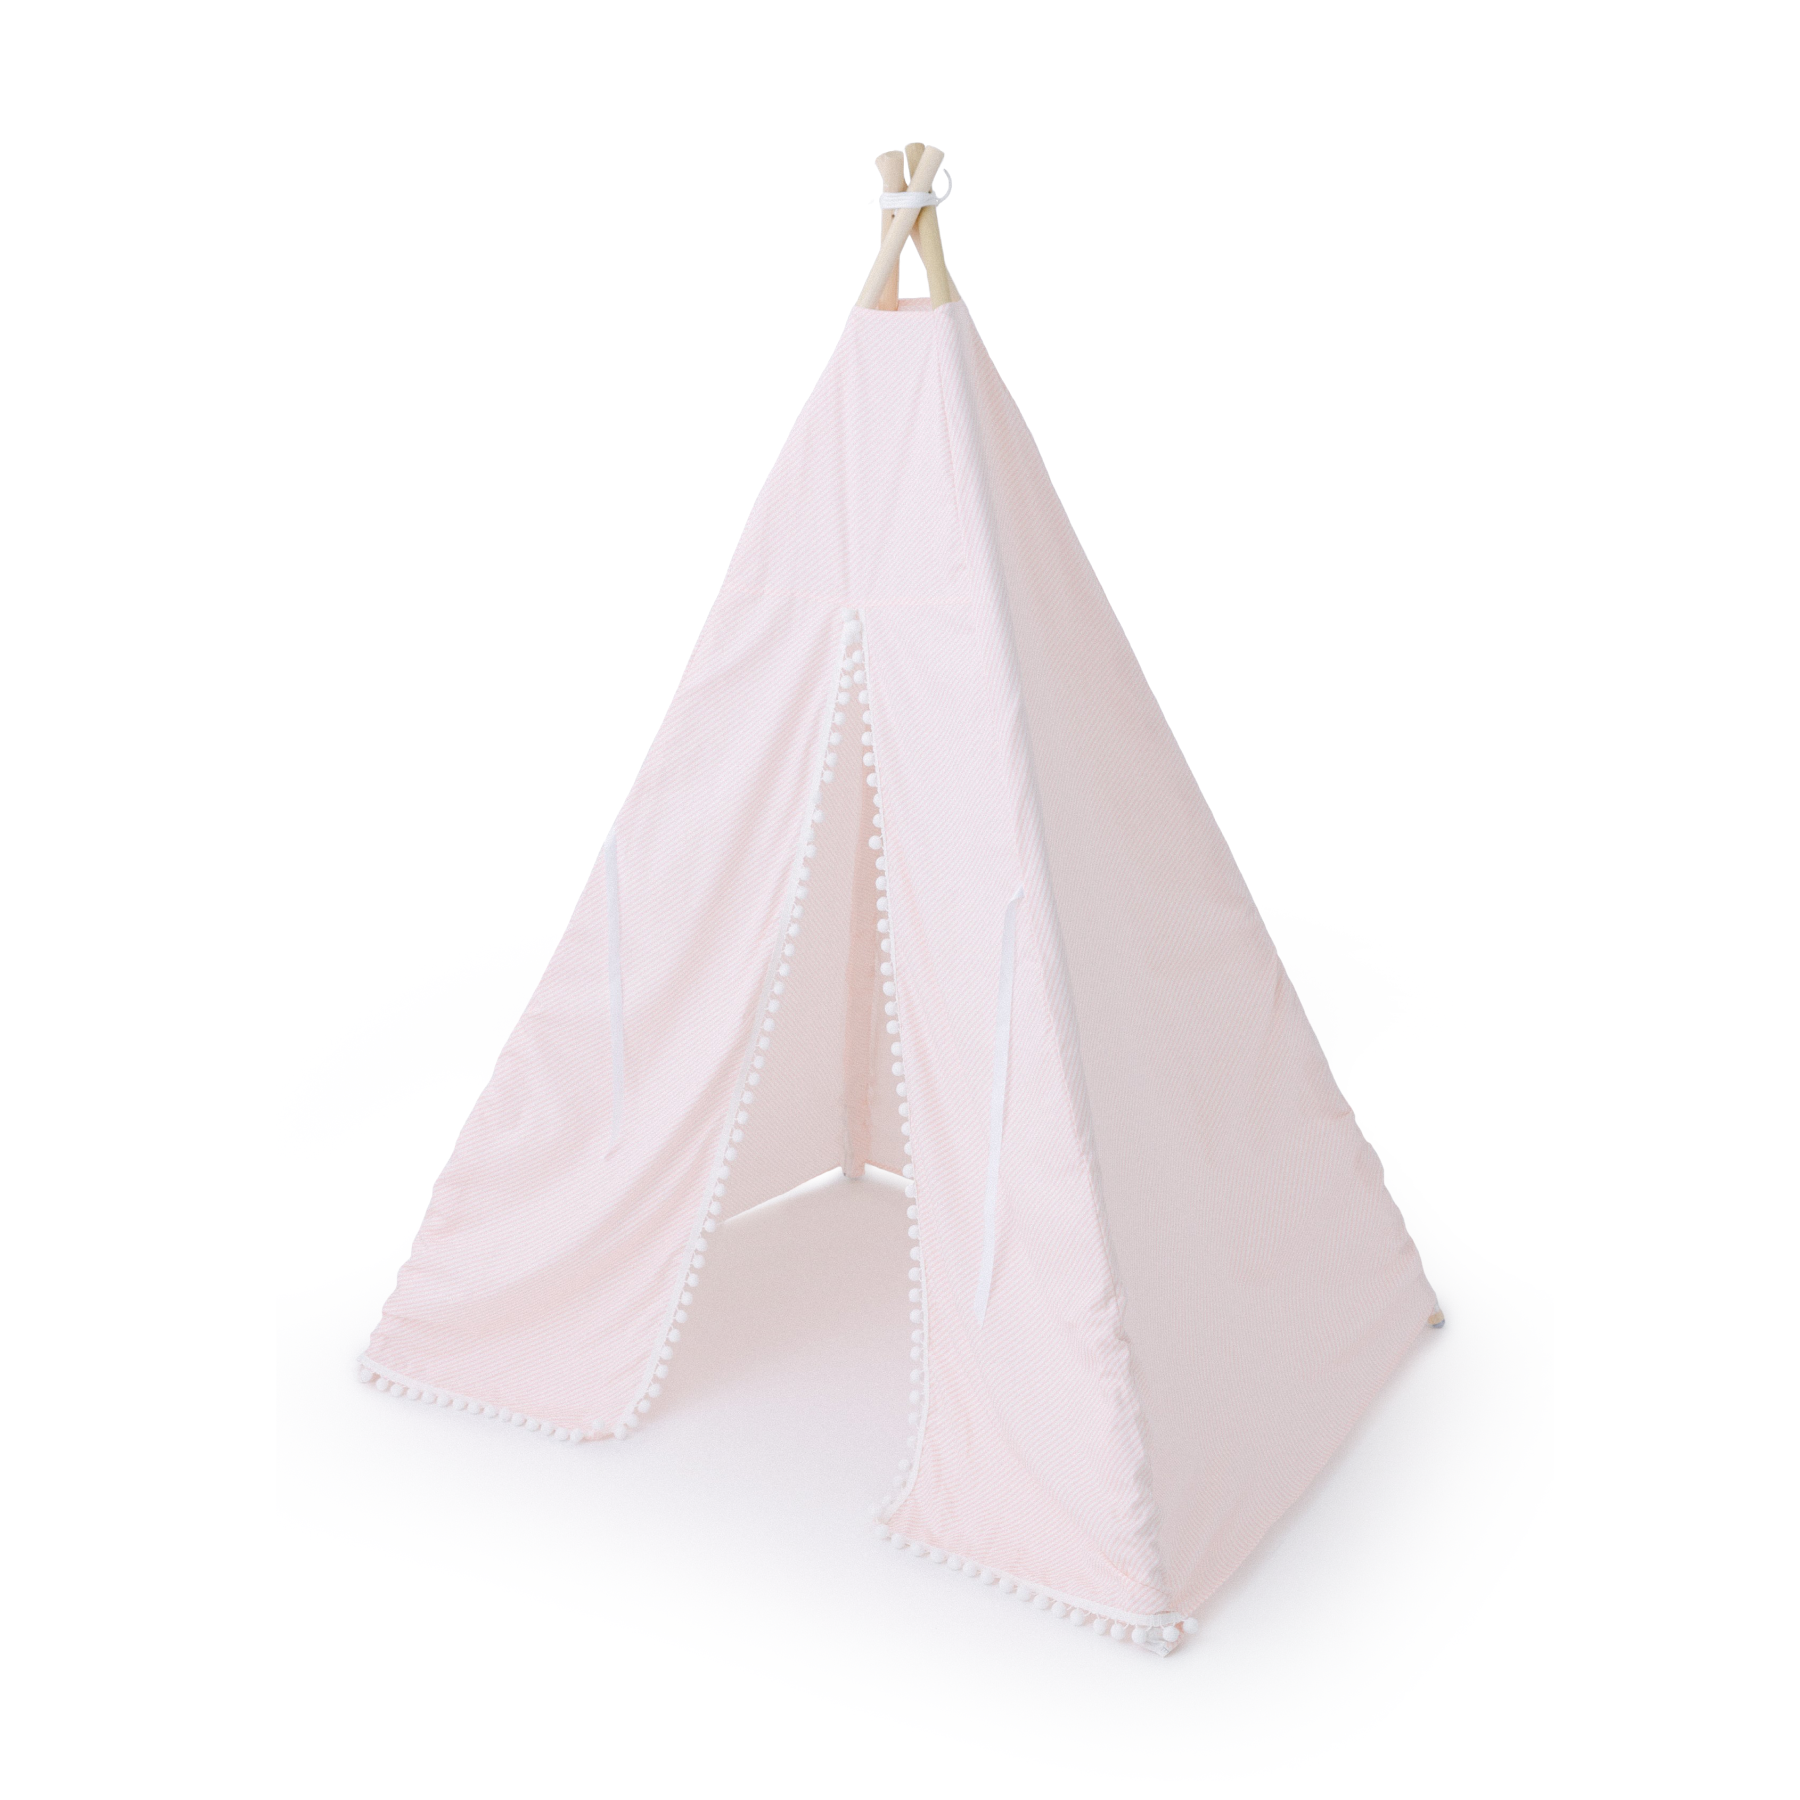 Play tent with light pink diagonal stripes